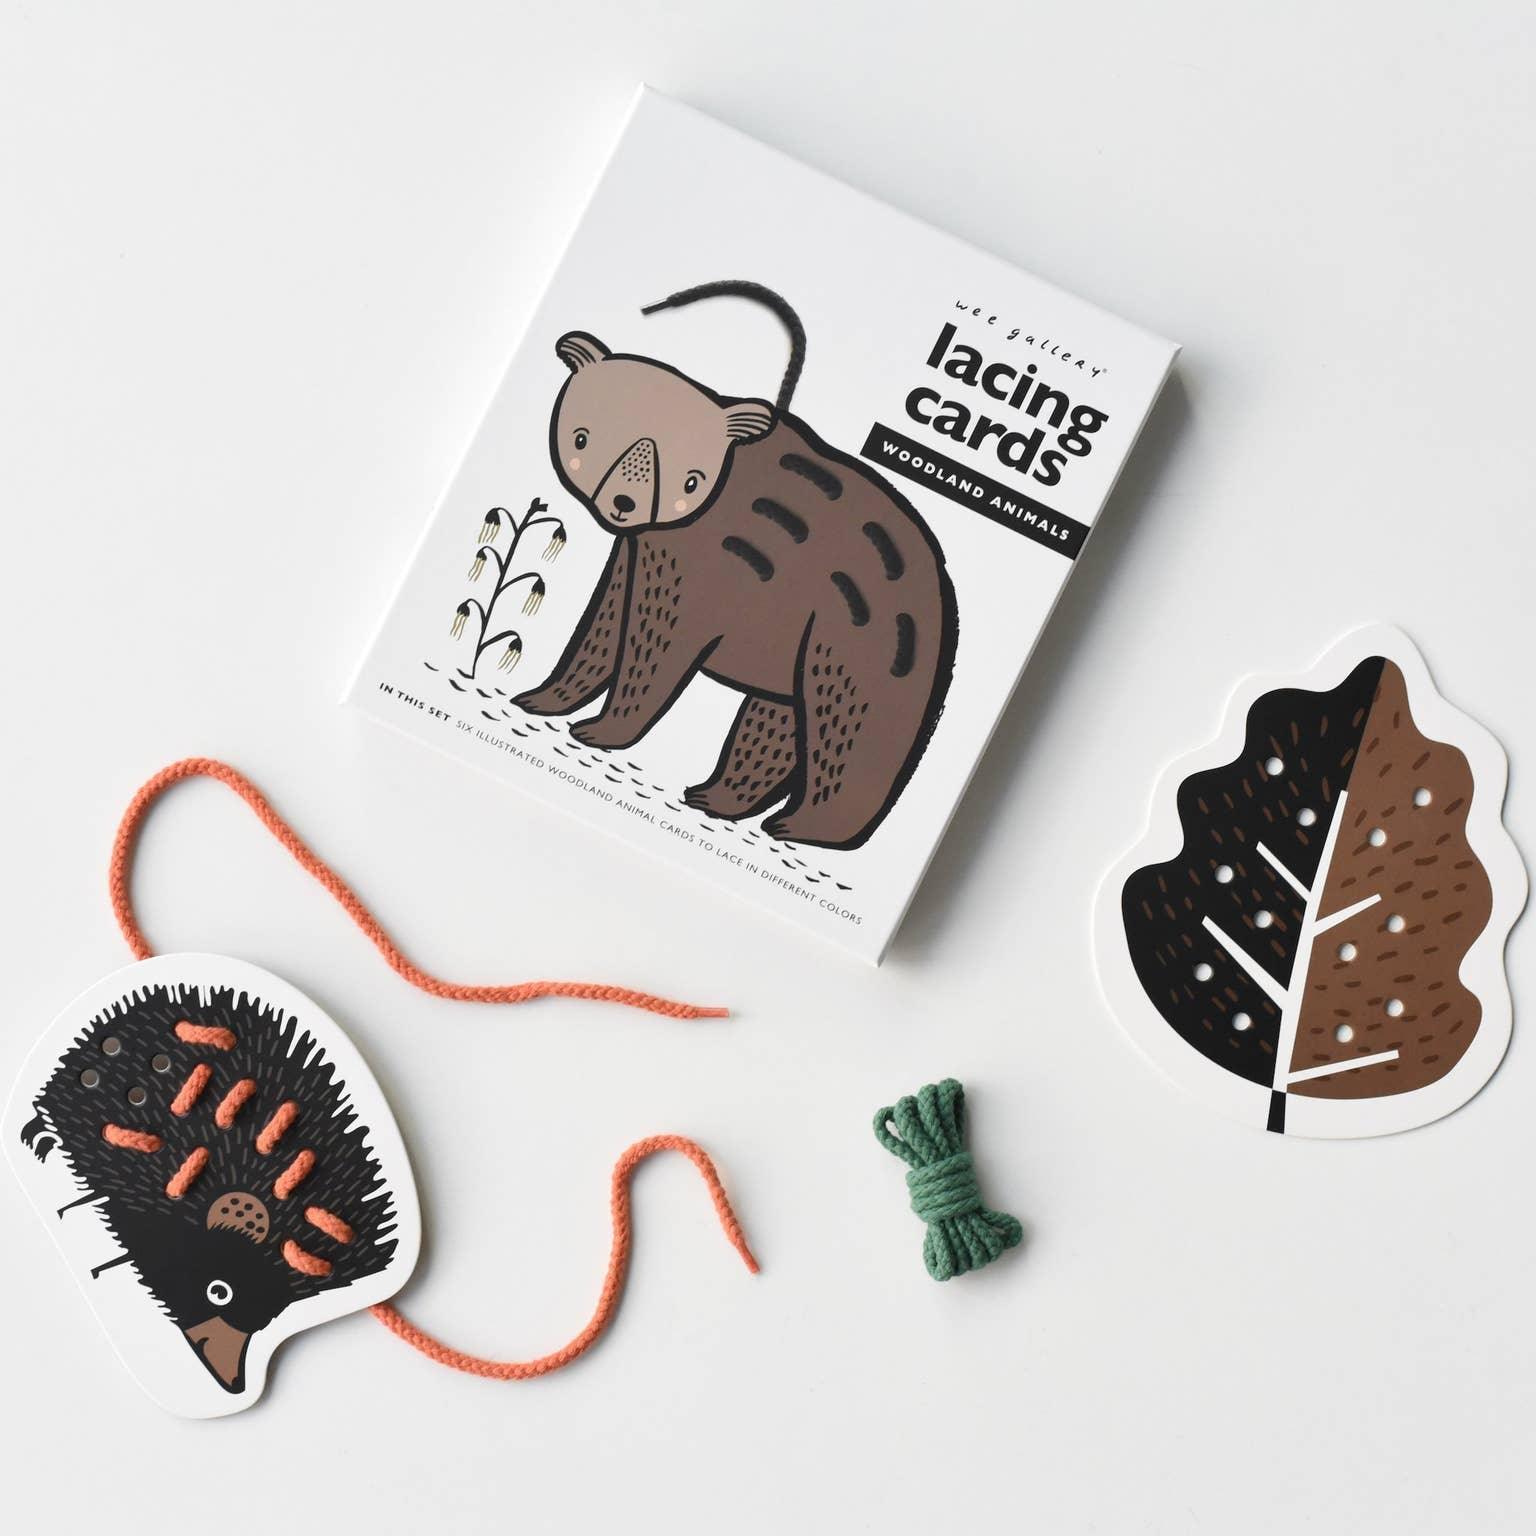 Lacing Cards, Woodland Animals - Why and Whale